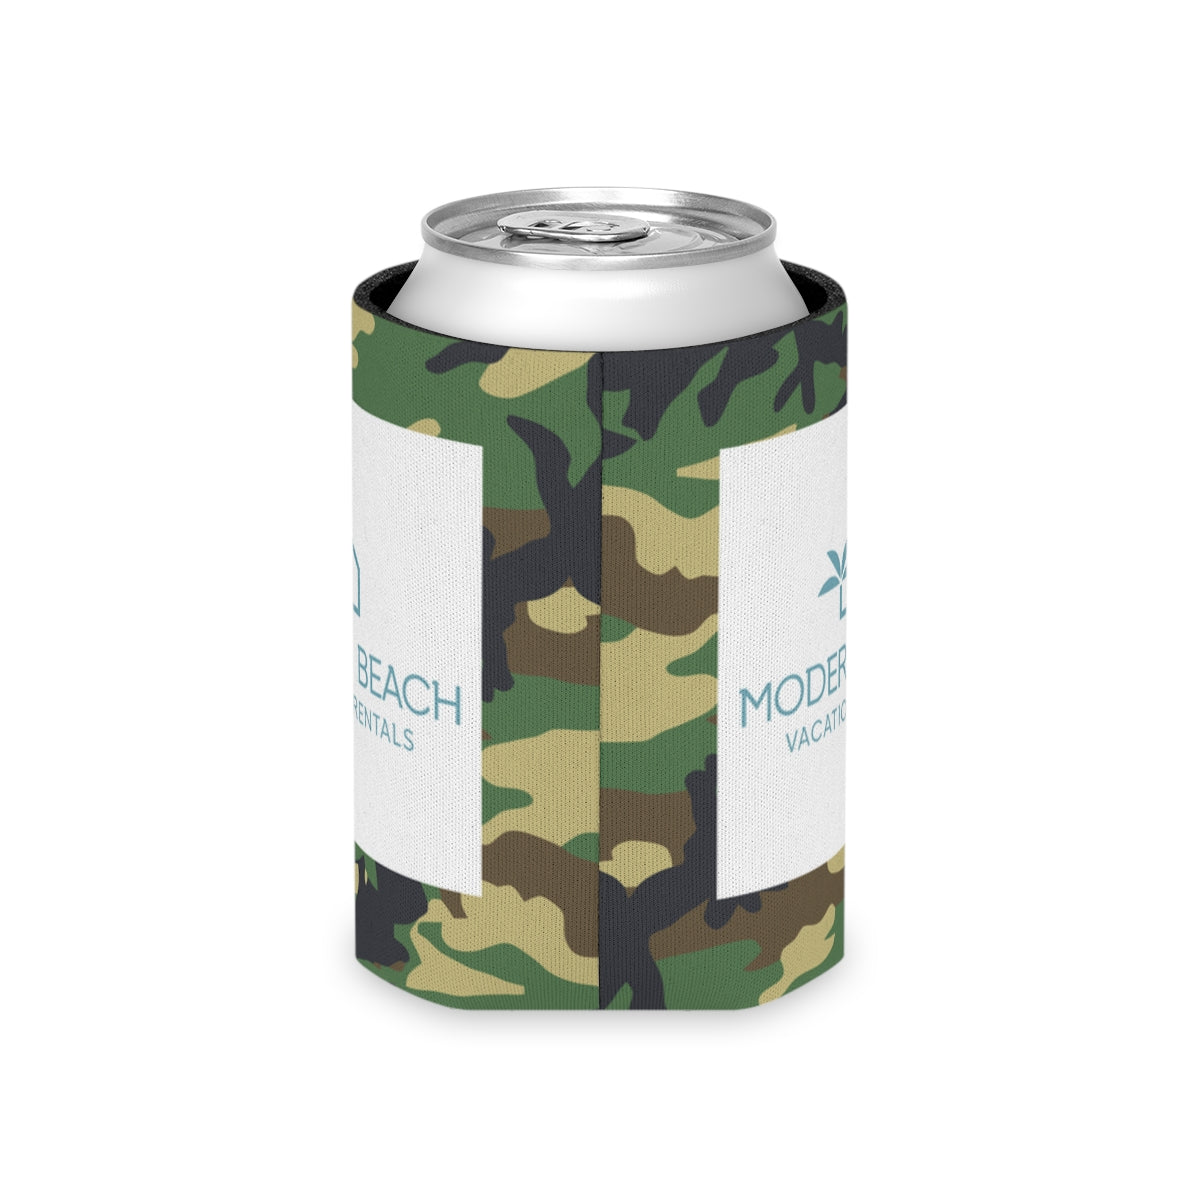 Modern Beach Vacation Rentals White Square Logo Camouflage BDU Can Coozie Cooler